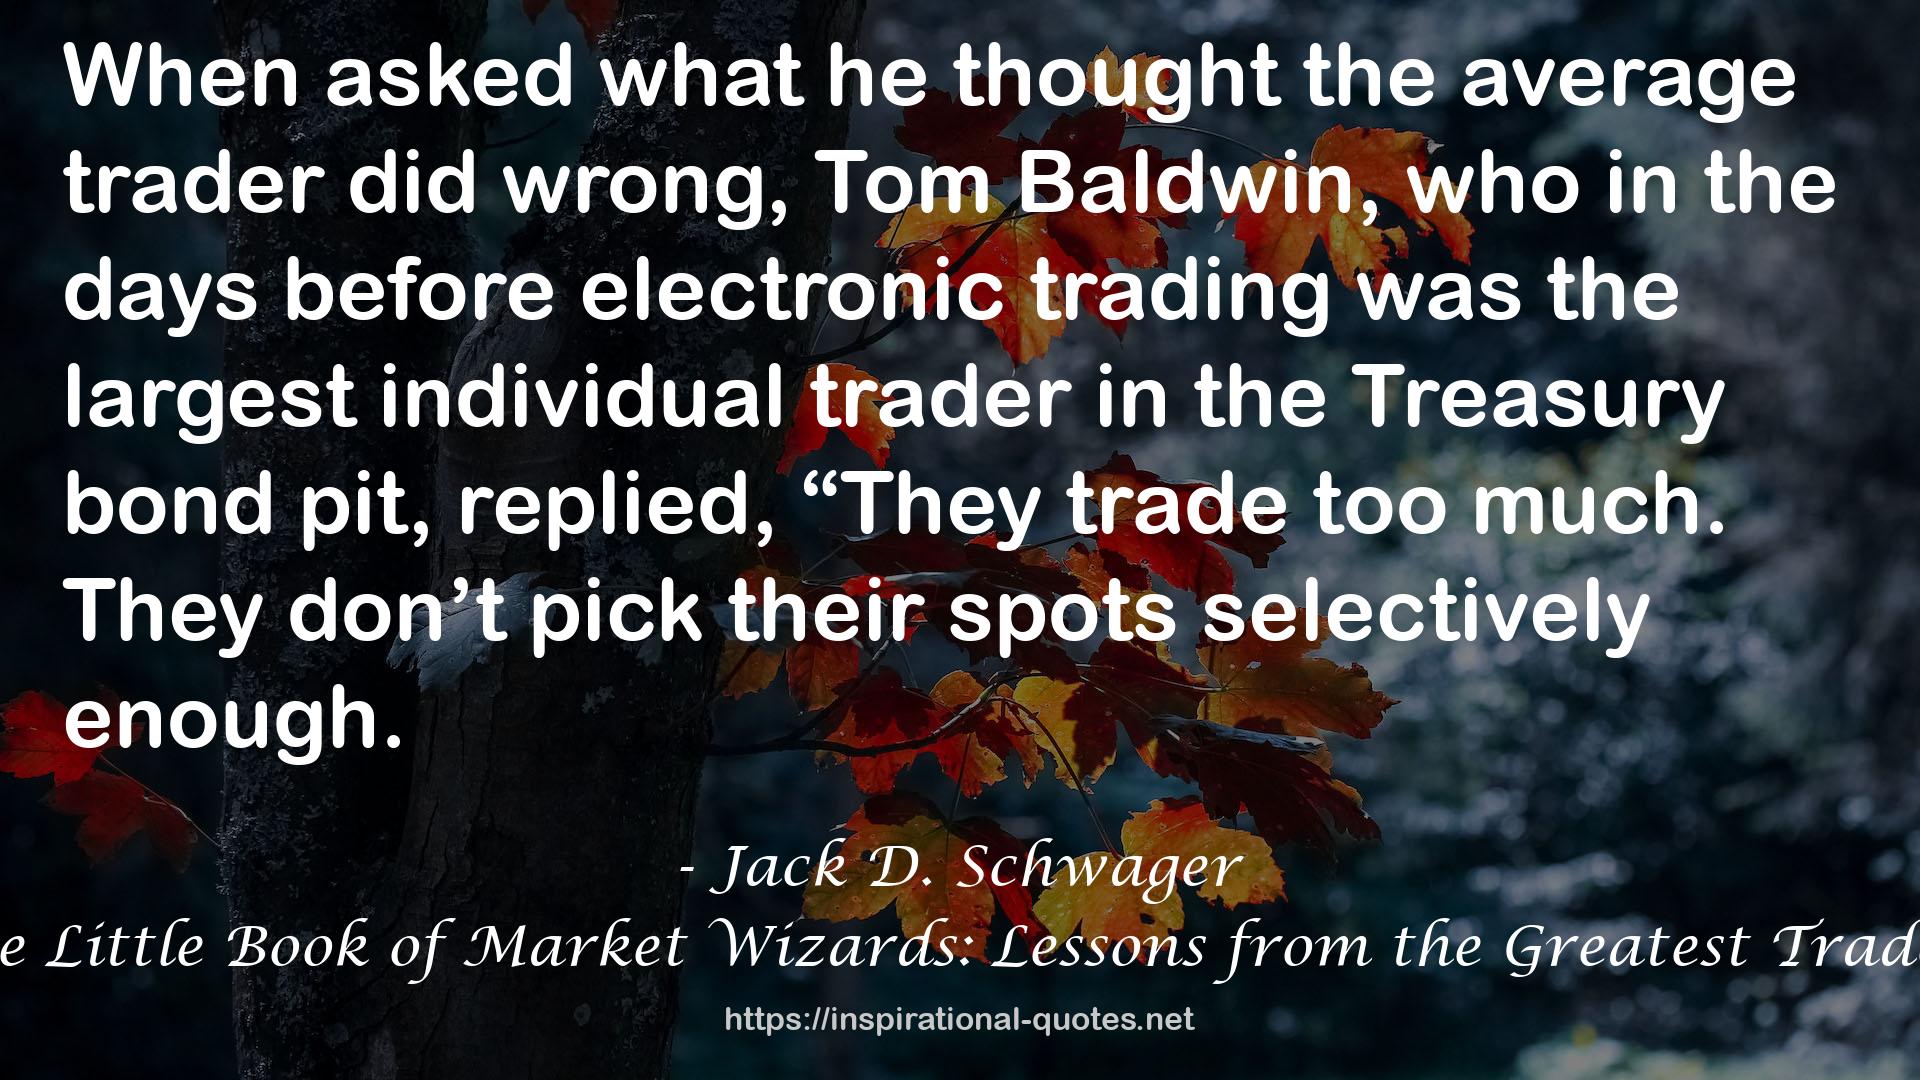 The Little Book of Market Wizards: Lessons from the Greatest Traders QUOTES